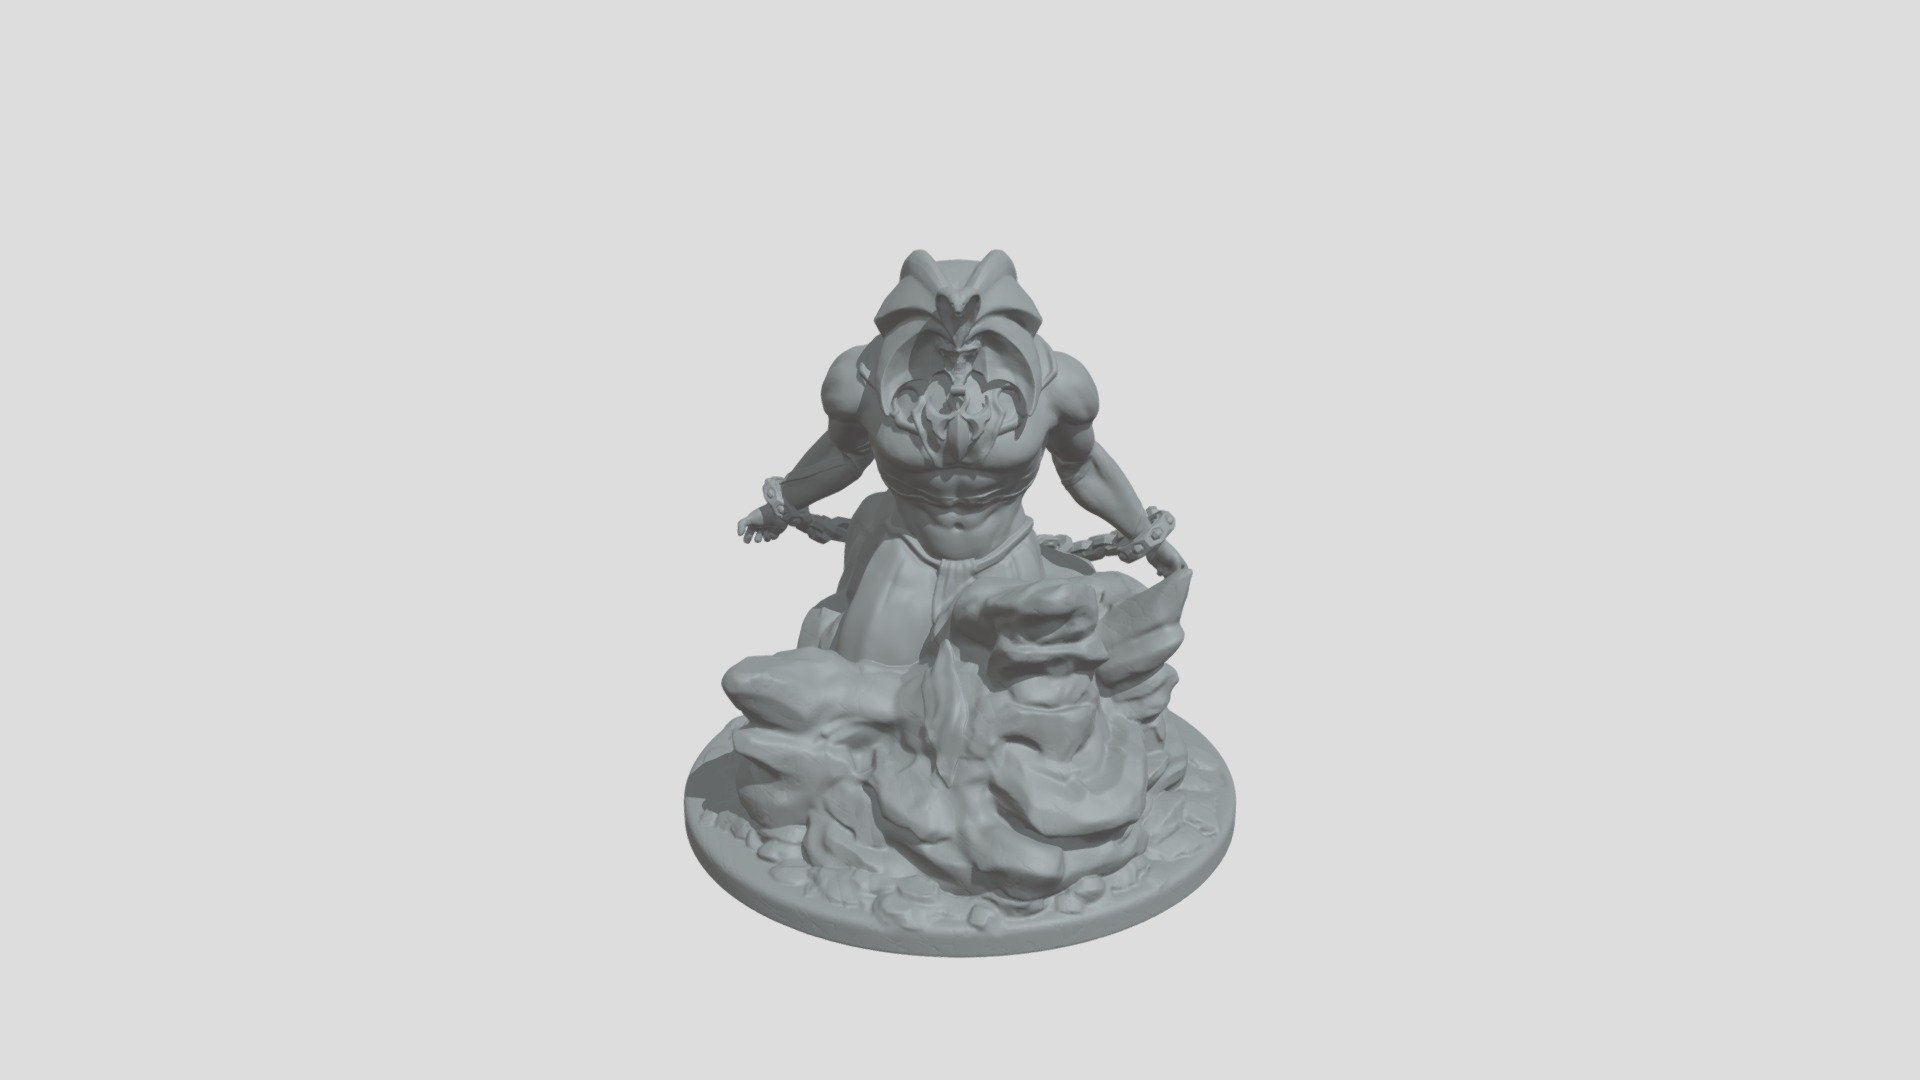 Watertight, 3D printable statuette of the all-mighty Exodia.
Ready for print 3d model